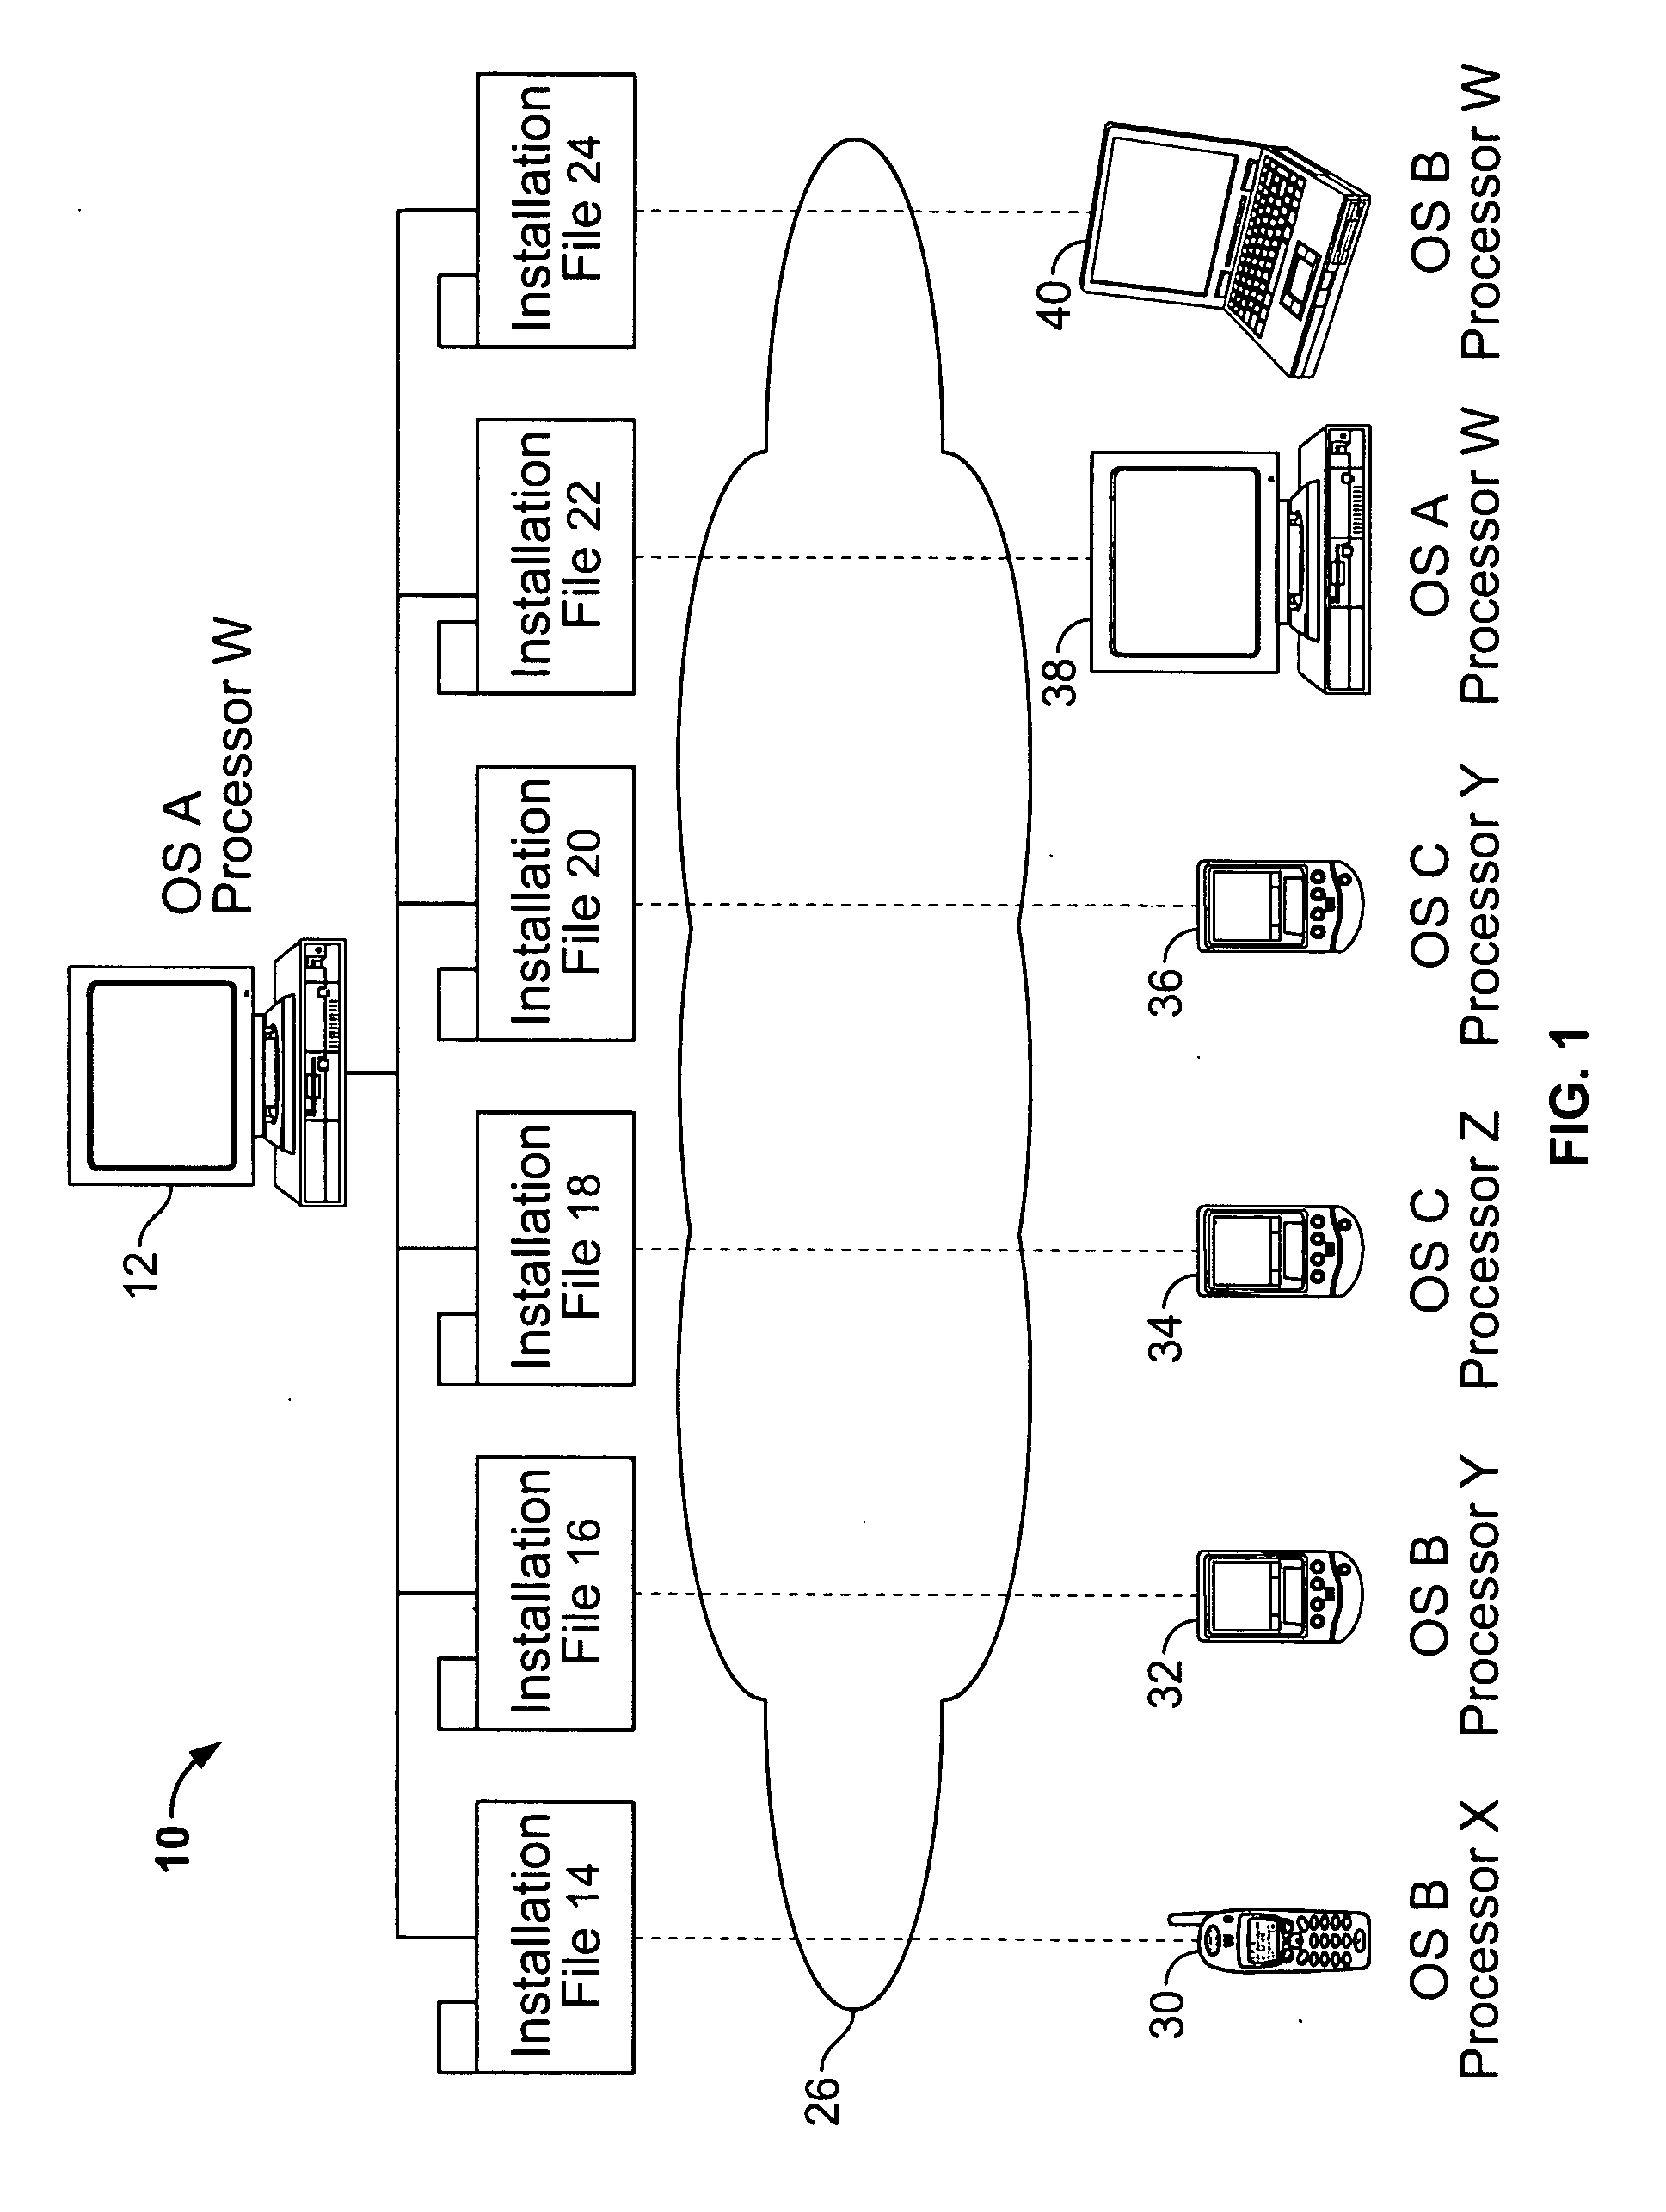 System and method for common file installation